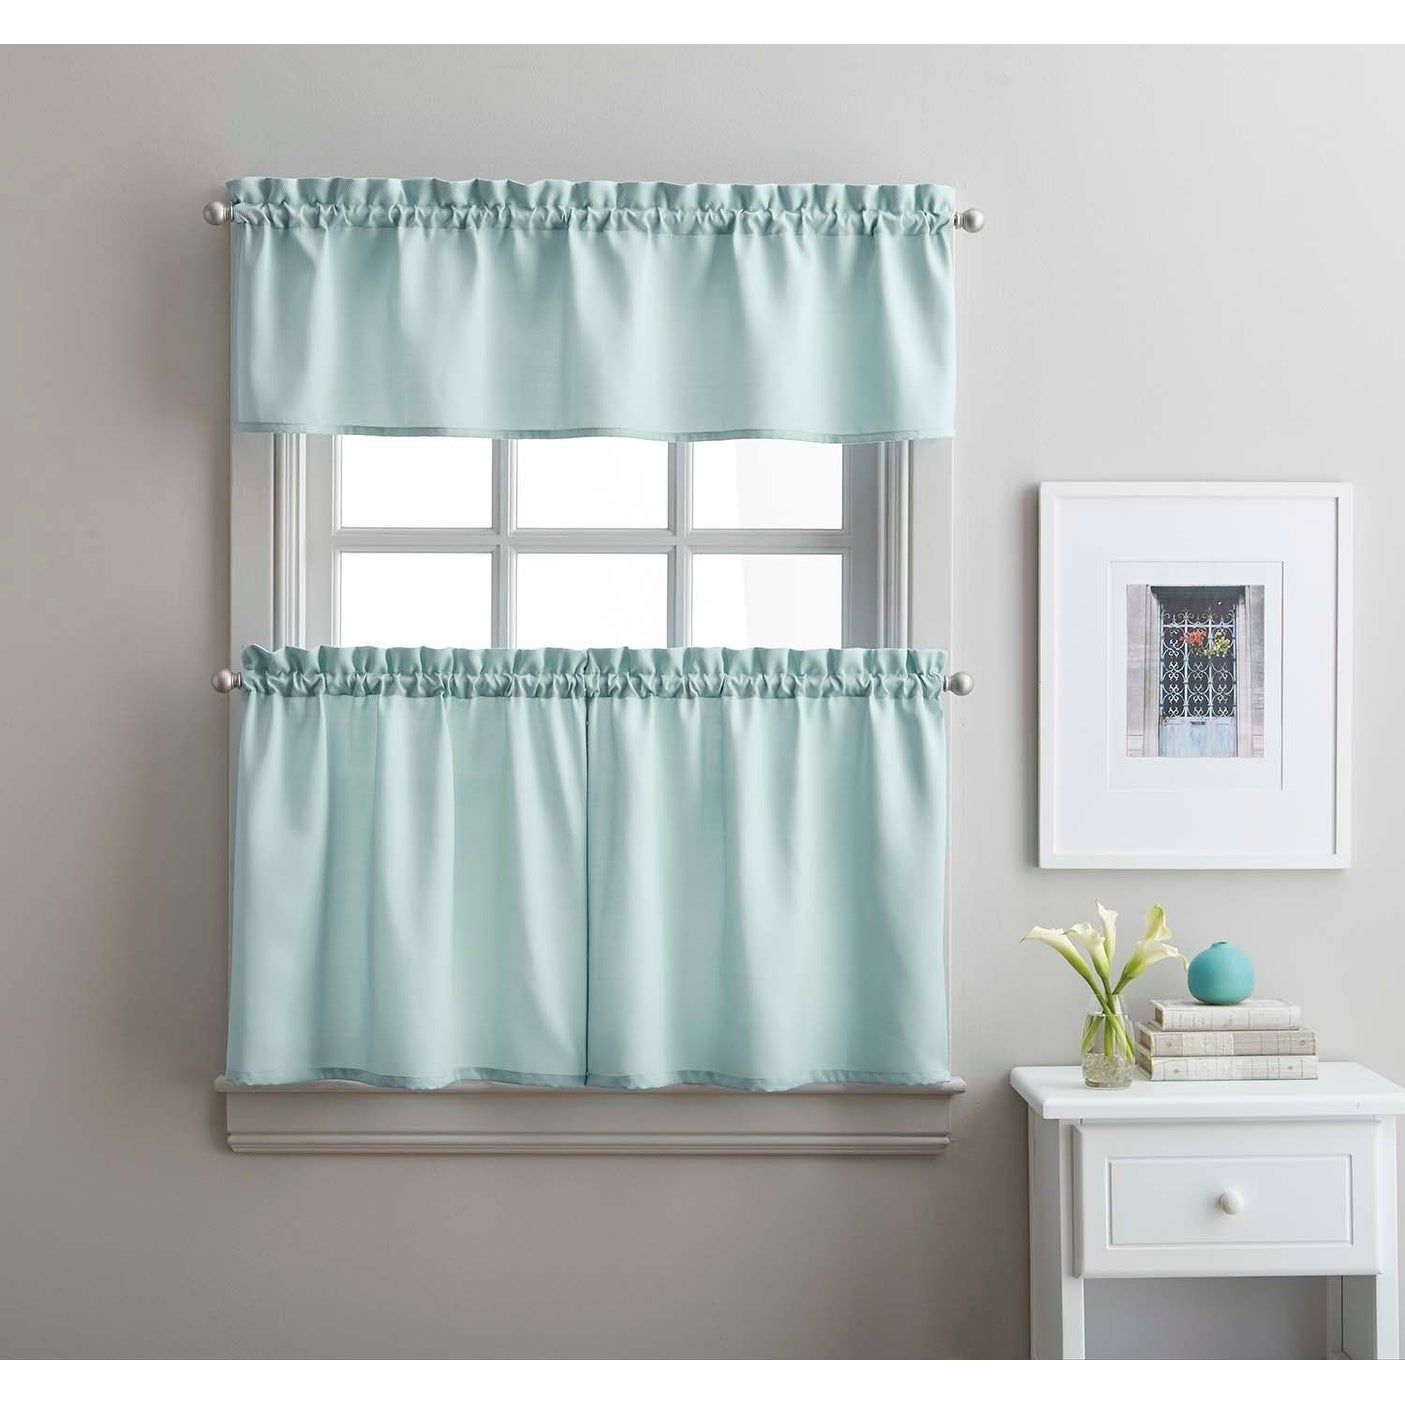 Twill 3 Piece Kitchen Curtain Tier Set For Wallace Window Kitchen Curtain Tiers (View 4 of 20)